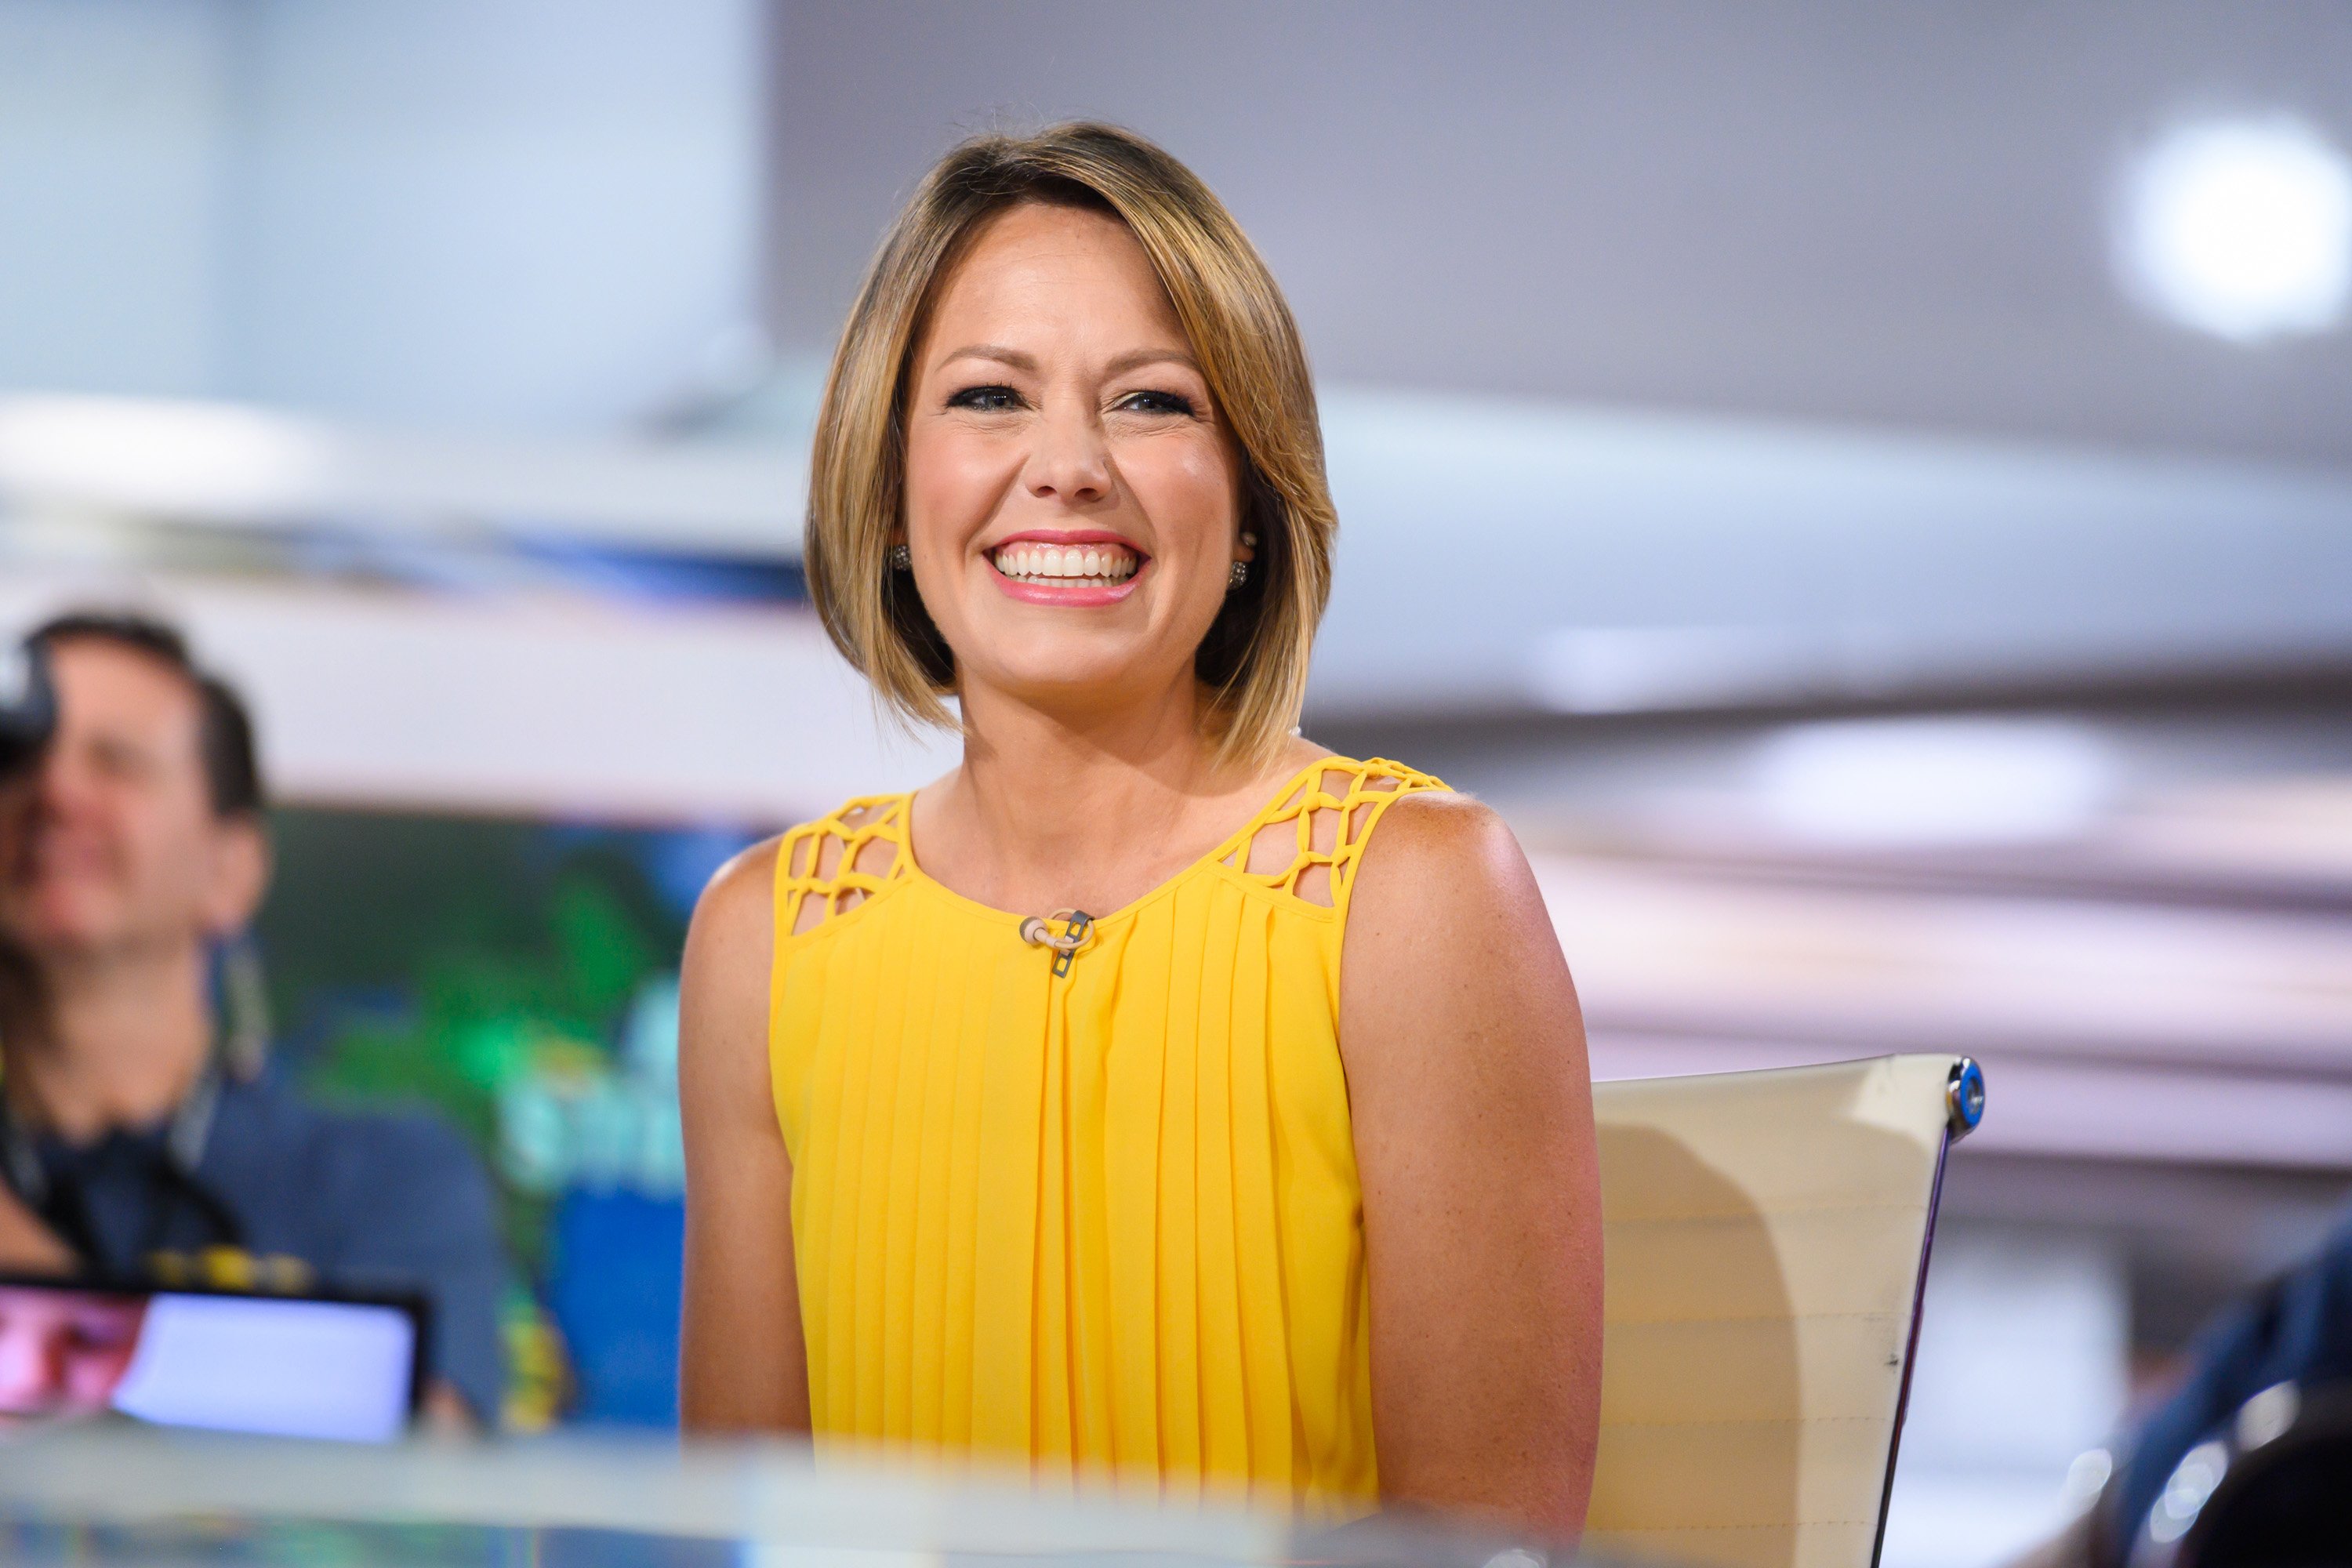 TV personality Dylan Dreyer on the "TODAY" set, July 17, 2019 | Photo: Getty Images